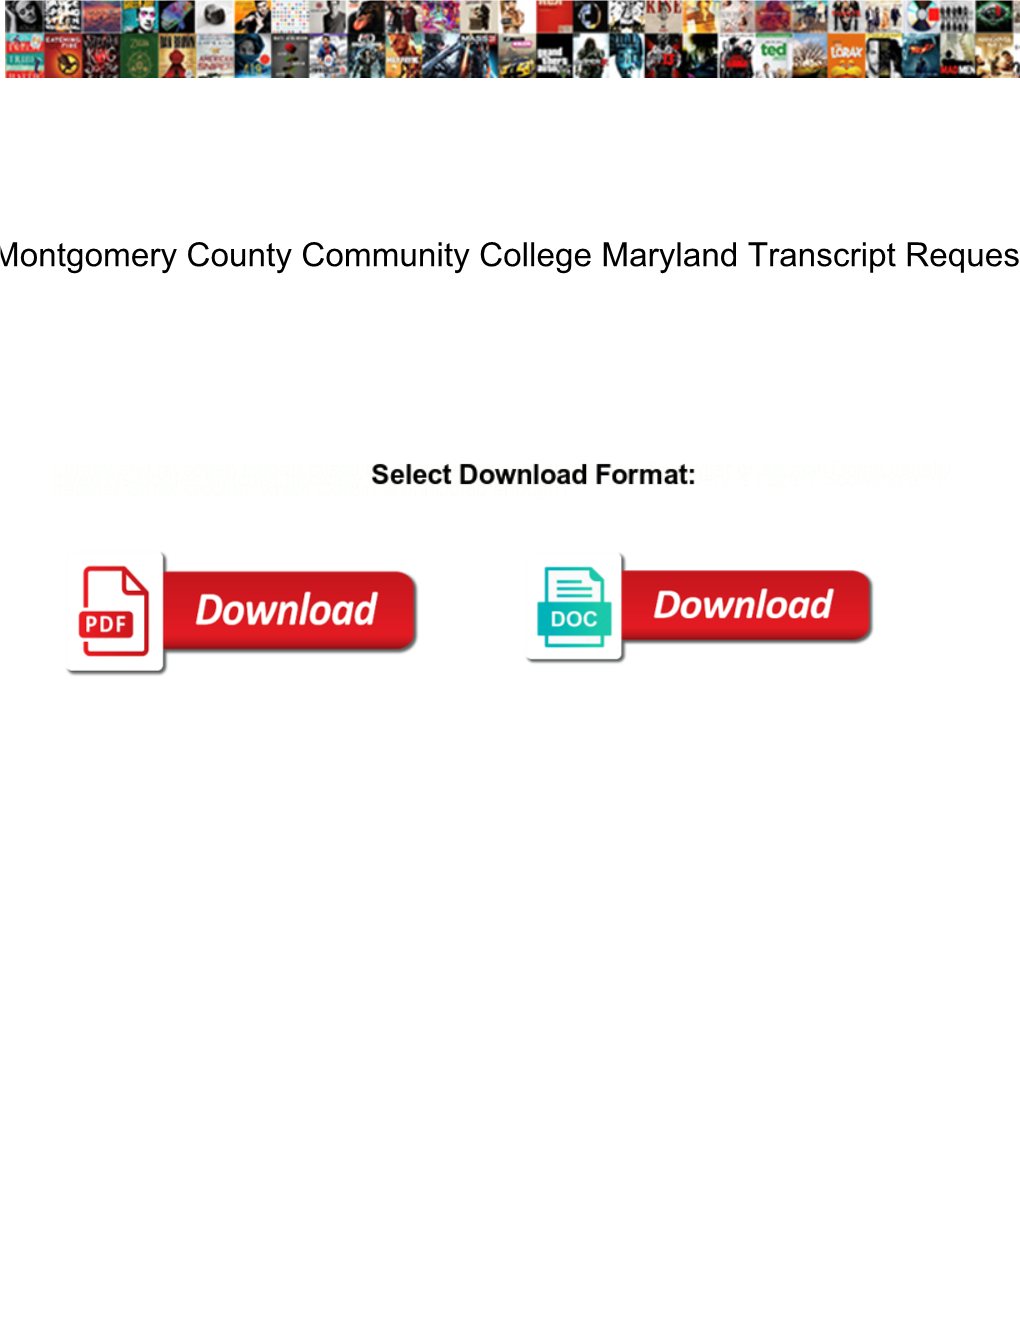 Montgomery County Community College Maryland Transcript Request